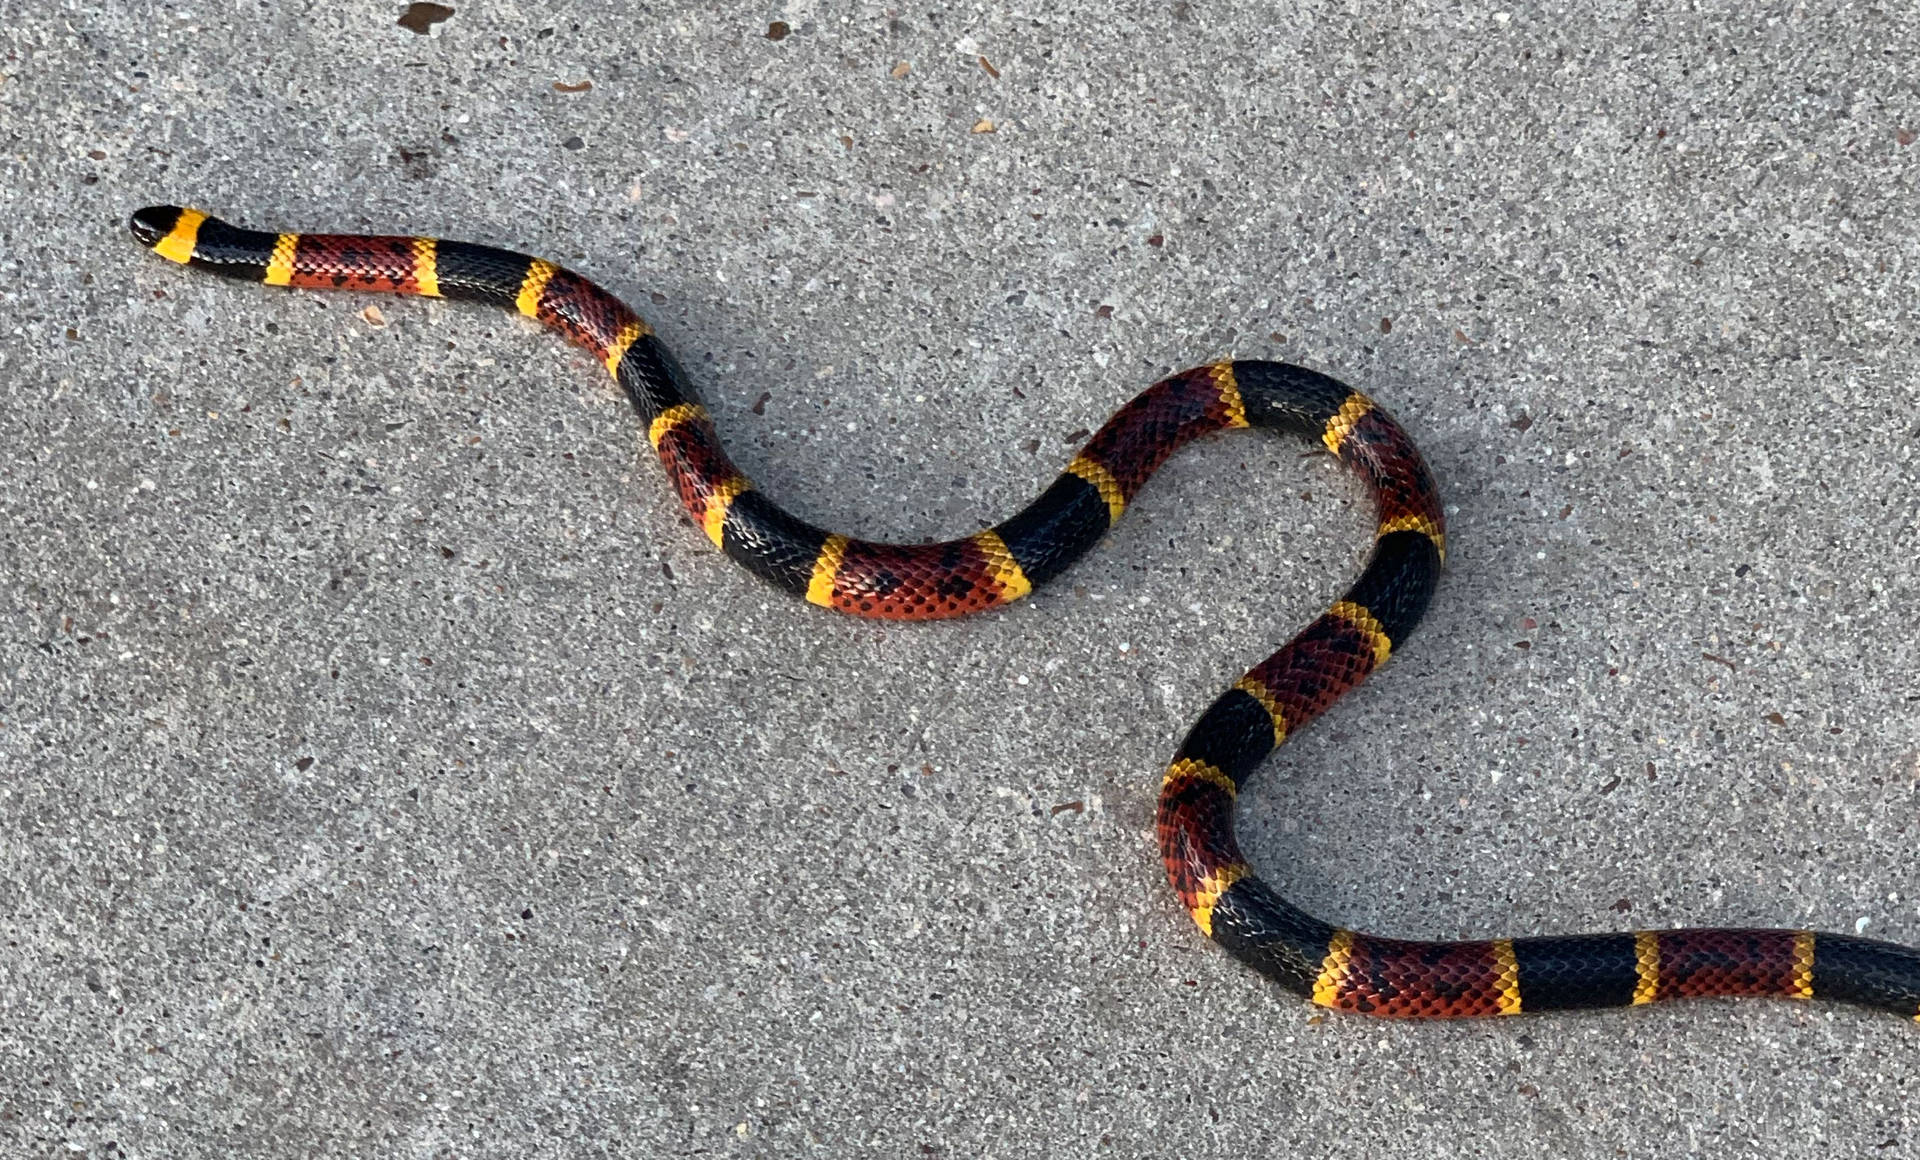 Texas Coral Snake Crawling Over Concrete Wallpaper